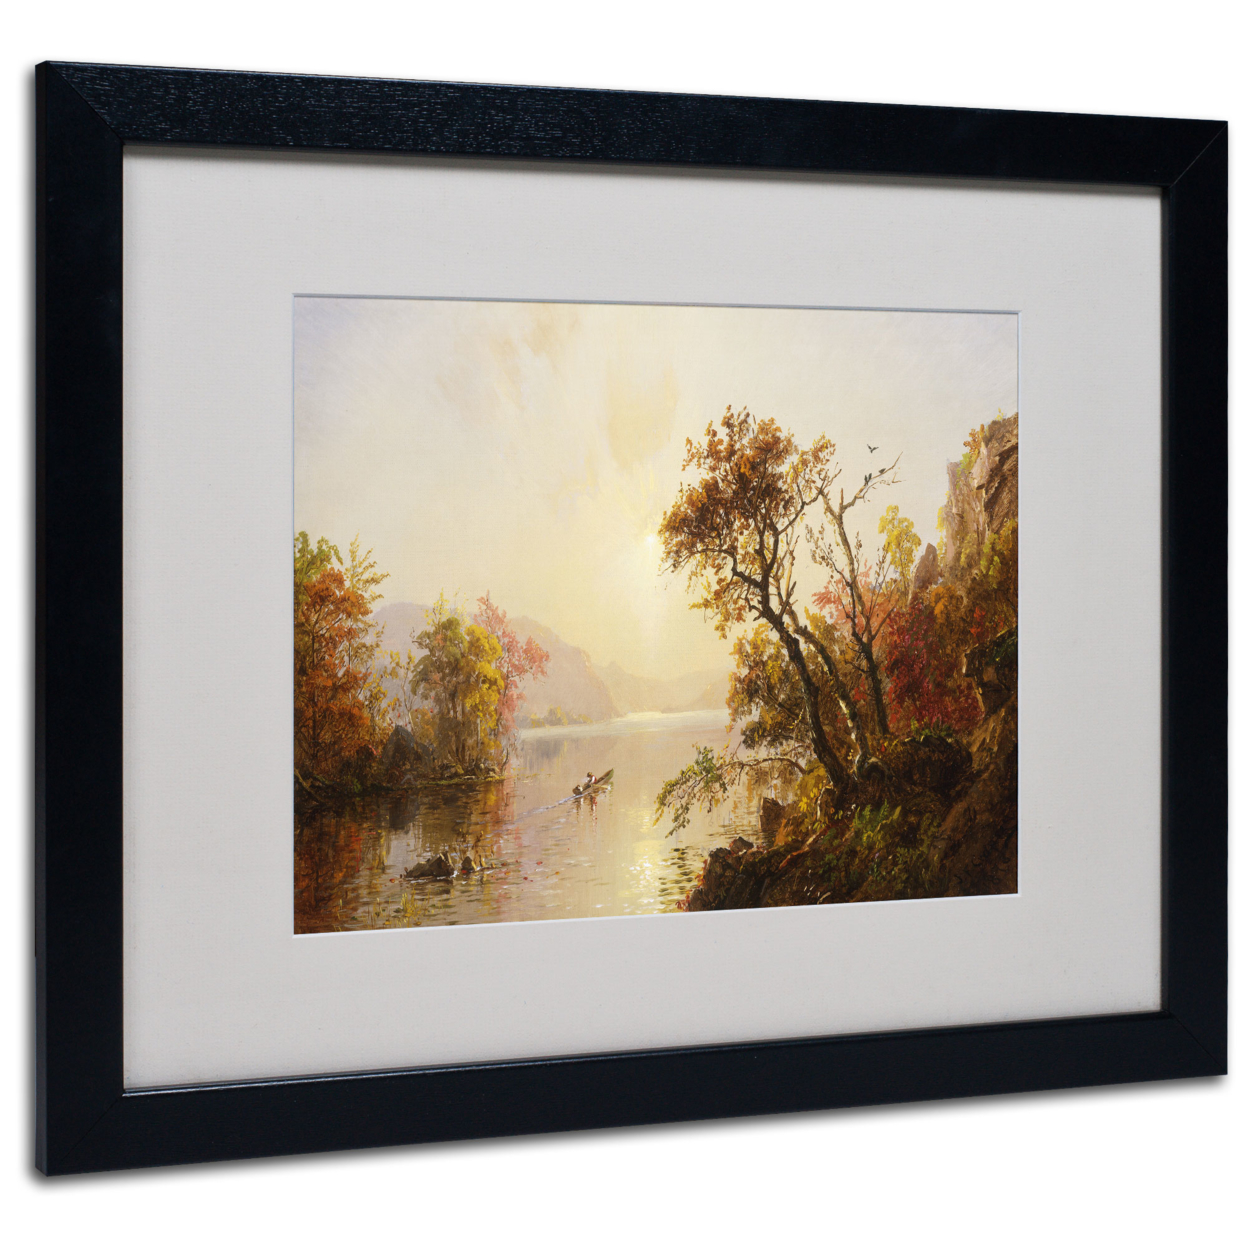 Jasper Cropsey 'Rowing Out Of A Cove 1878' Black Wooden Framed Art 18 X 22 Inches